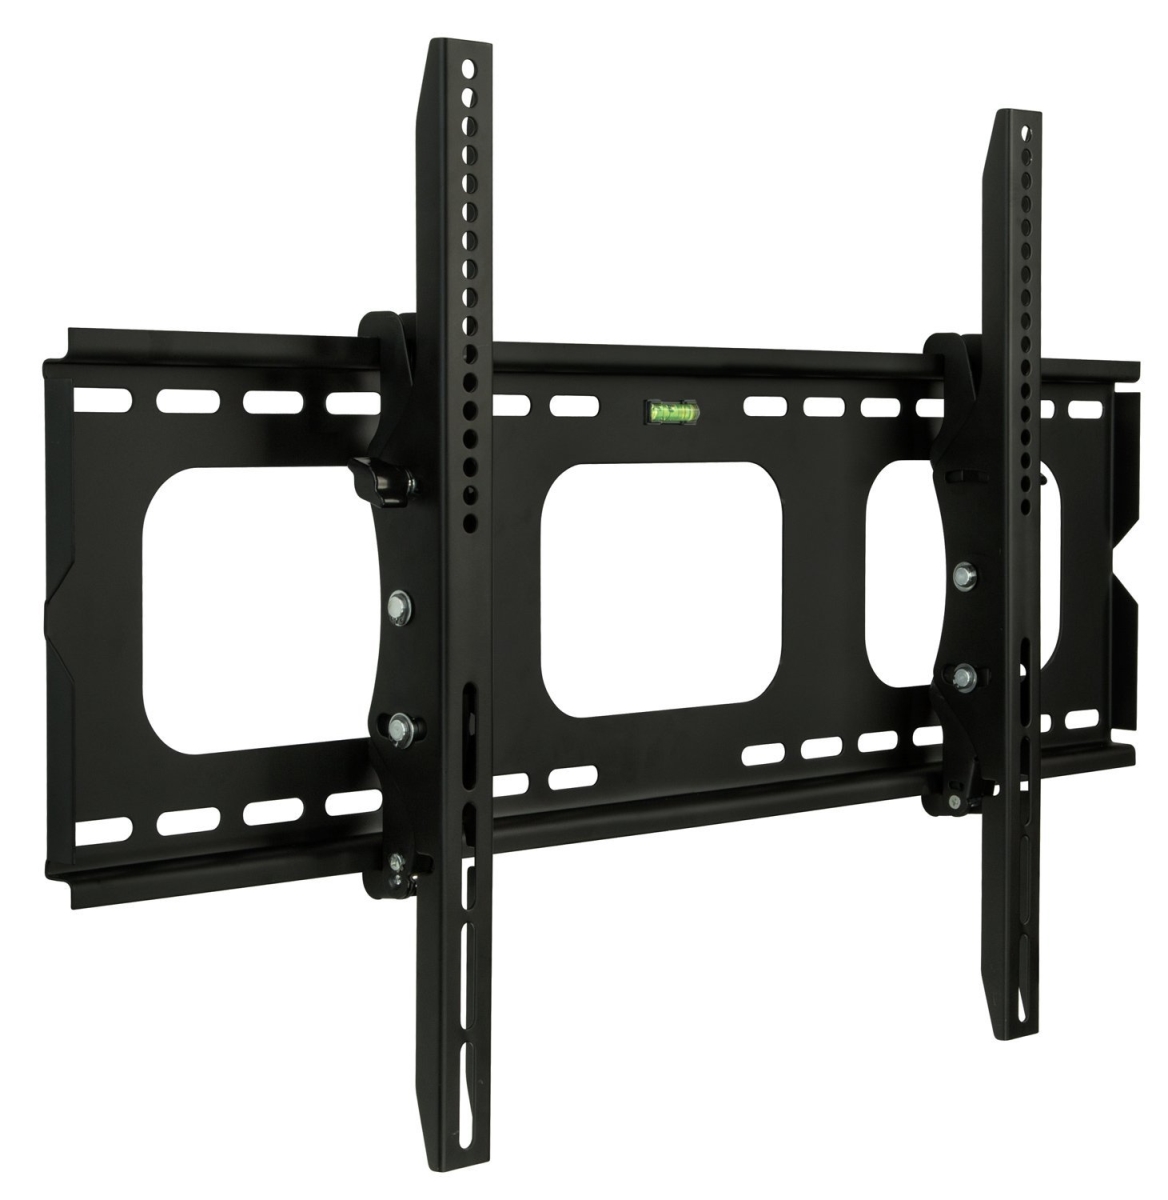 32-65 in. TV Wall Mount Bracket for LCD LED or Plasma Flat Screen TV -  BetterBattery, BE387116